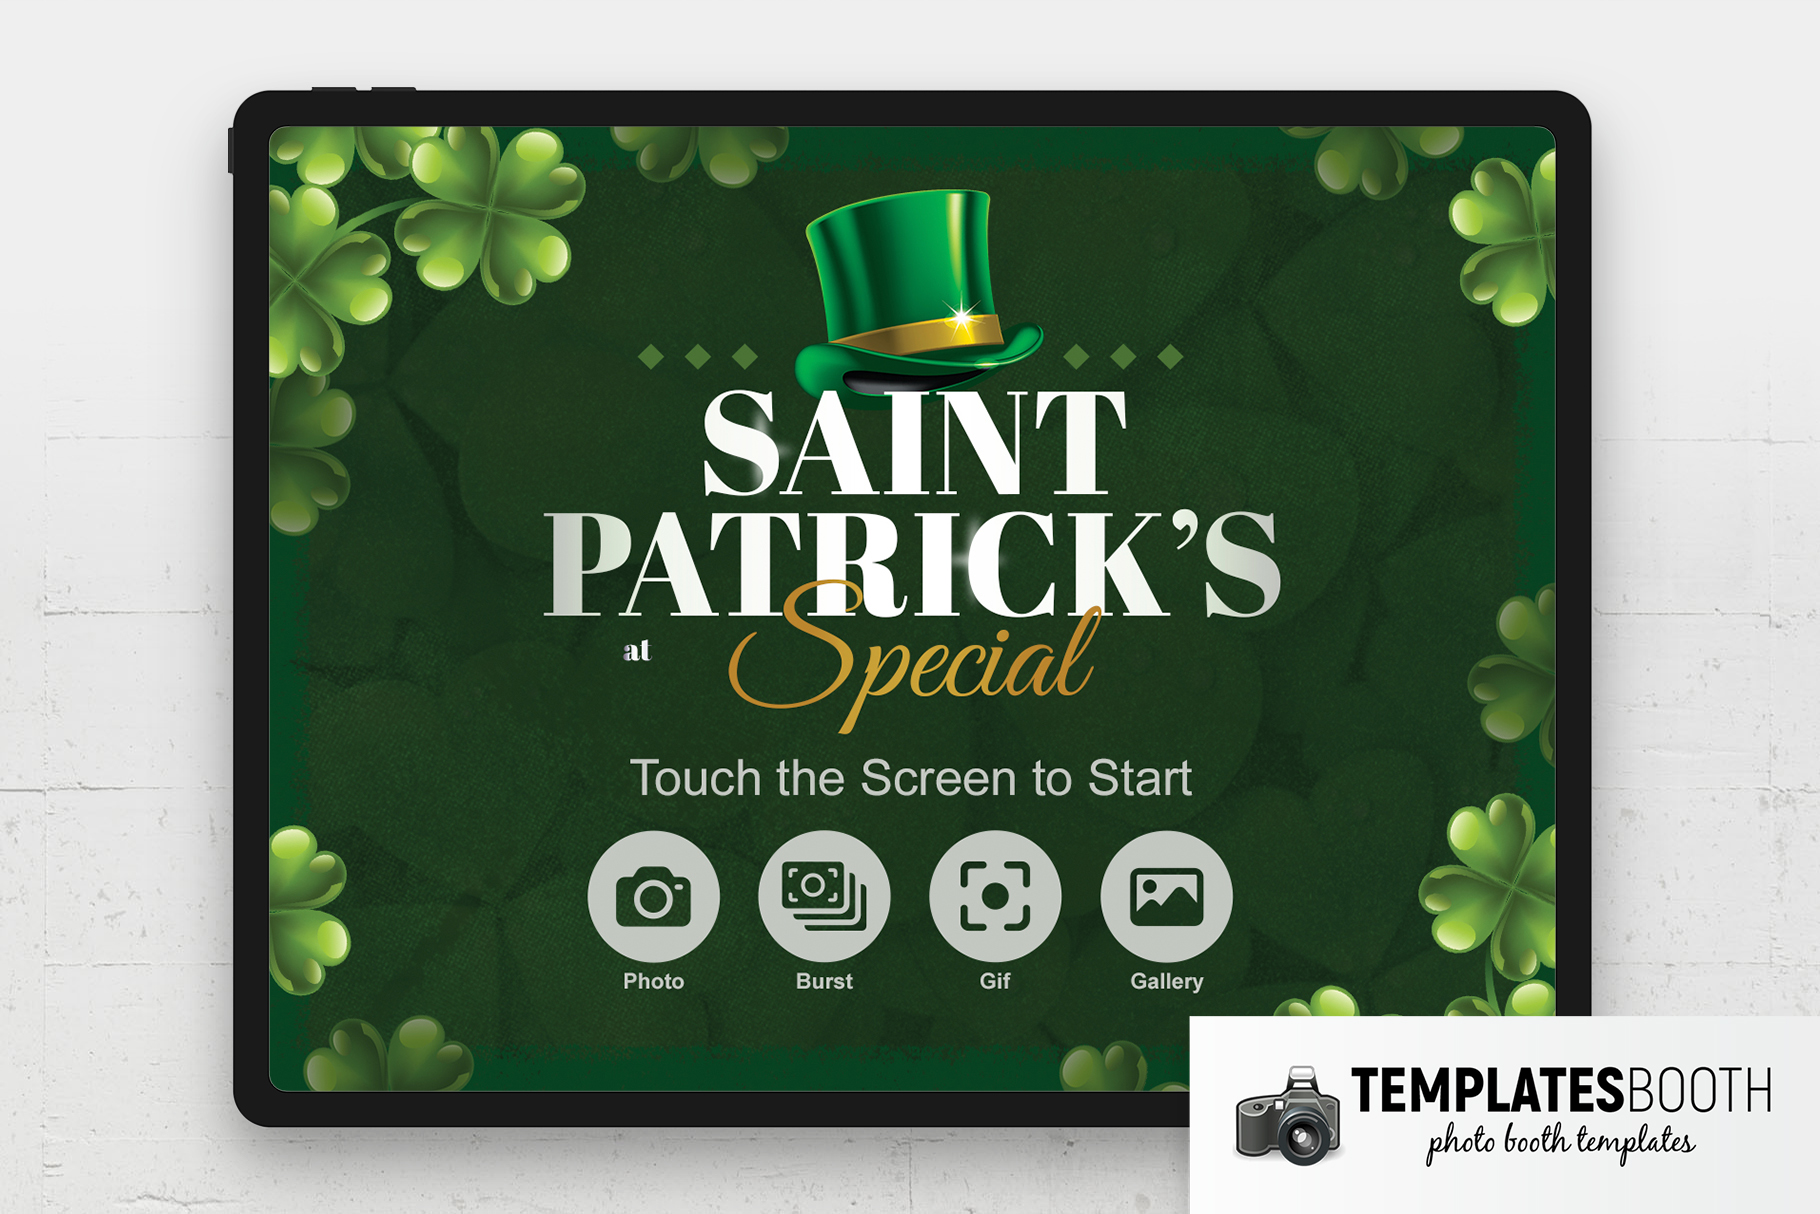 St. Patrick's Day Photo Booth Welcome Screen